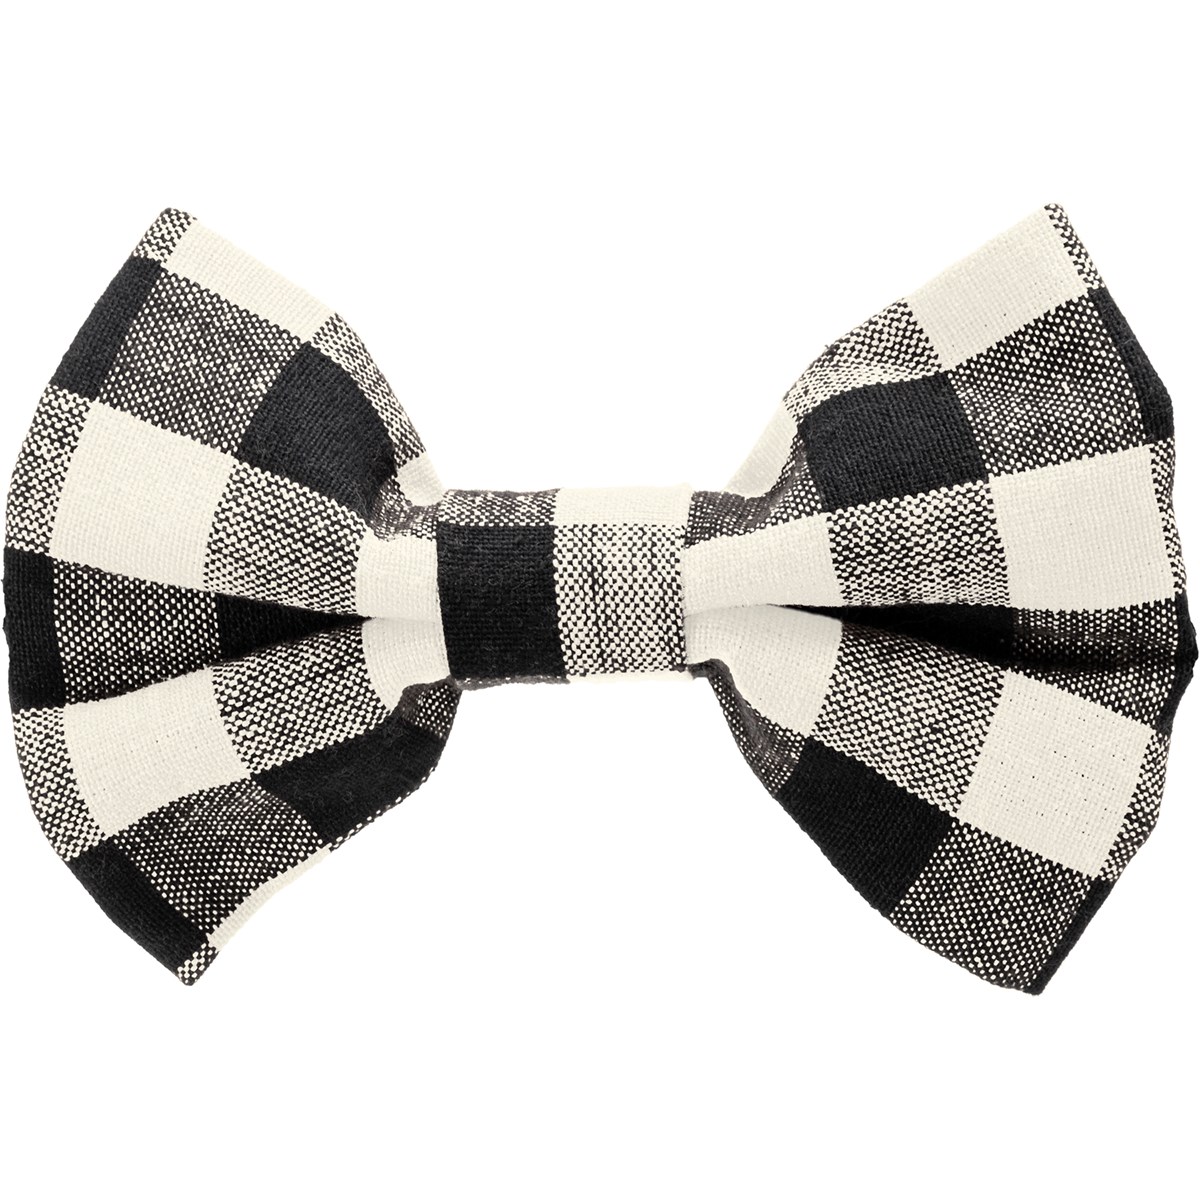 Pet Bow Tie Set Lg - Buffalo Check - 5.50" x 3.50" x 2" - Cotton, Hook-and-Loop Fastener